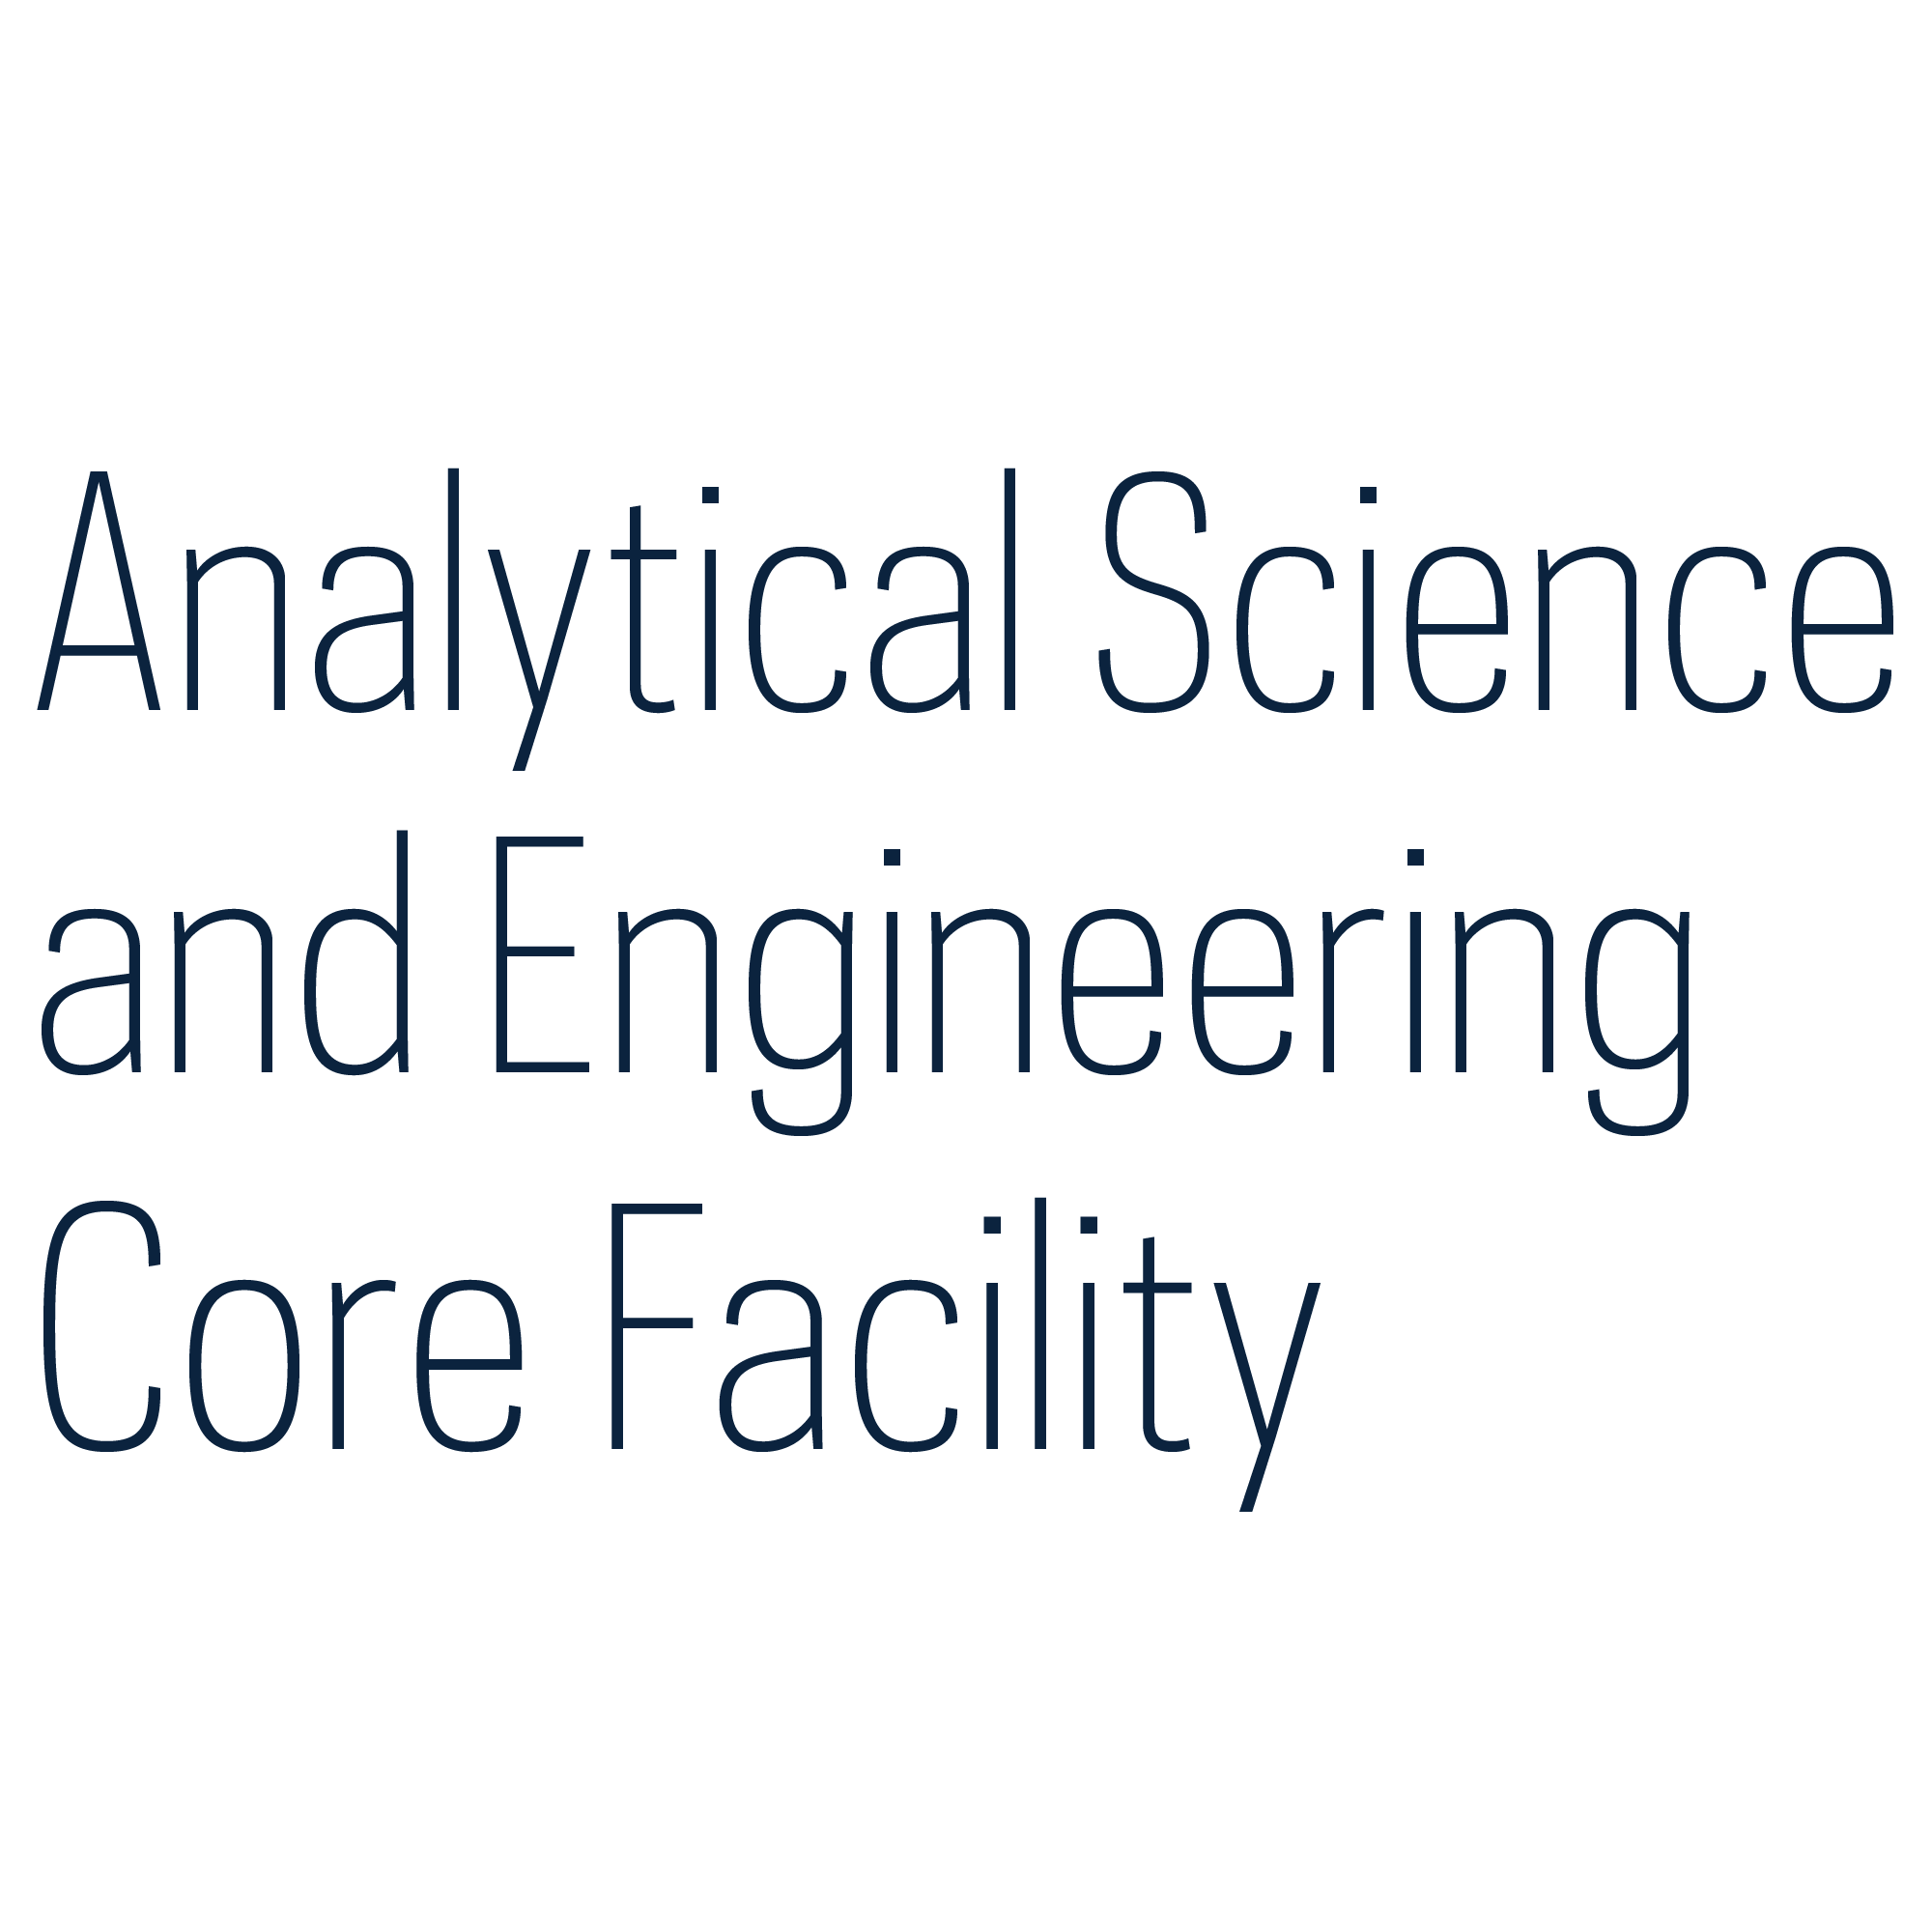 Analytical Science and Engineering Core Facility